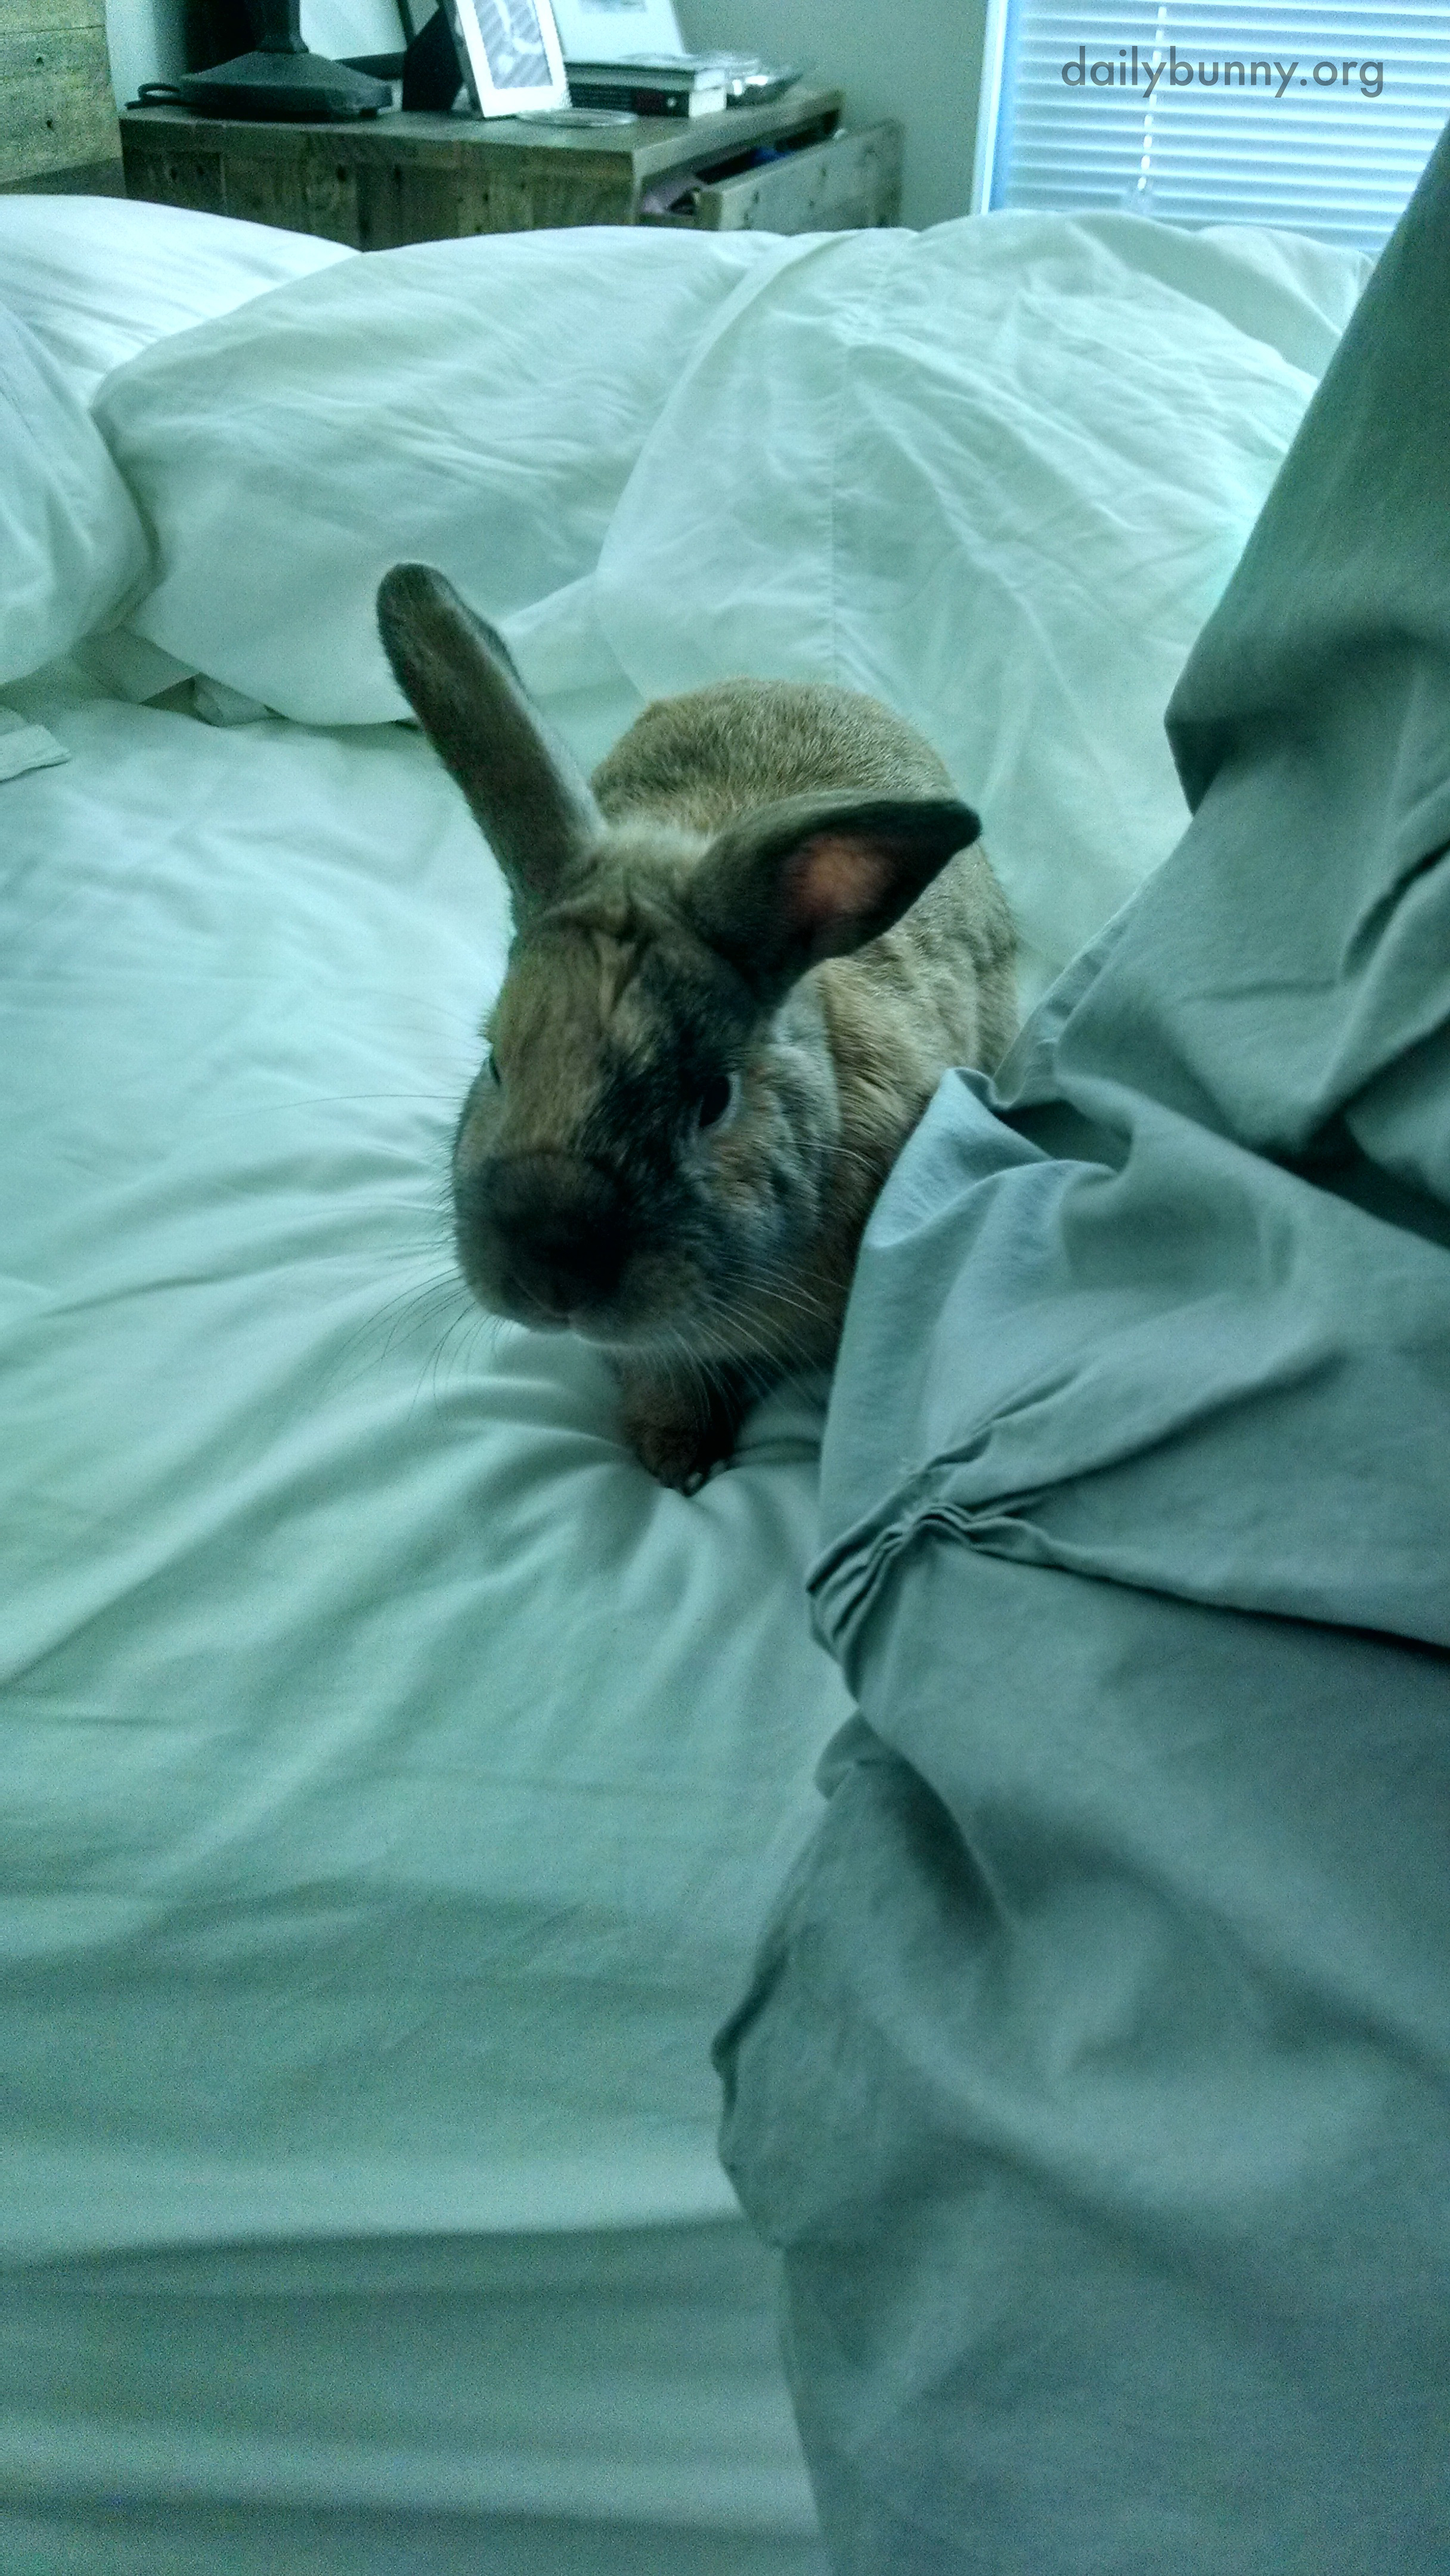 Bunny Is Ready for a Languid Morning Full of Cuddles - So Get Back in the Bed, Human! 2